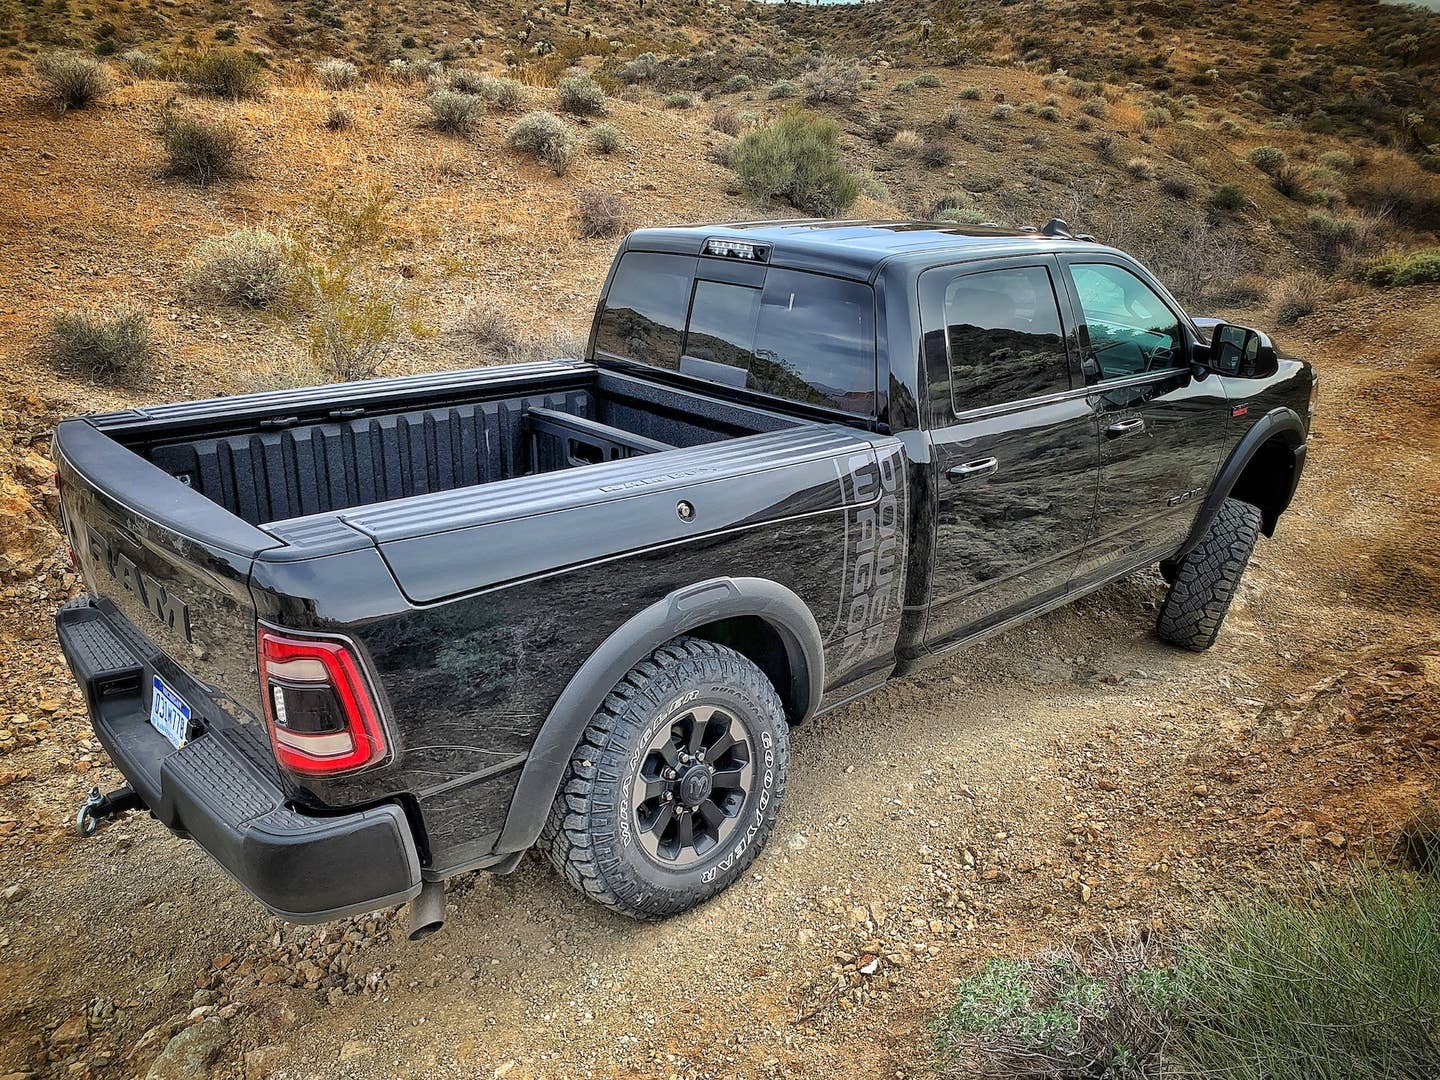 2019 Ram Heavy Duty first drive review